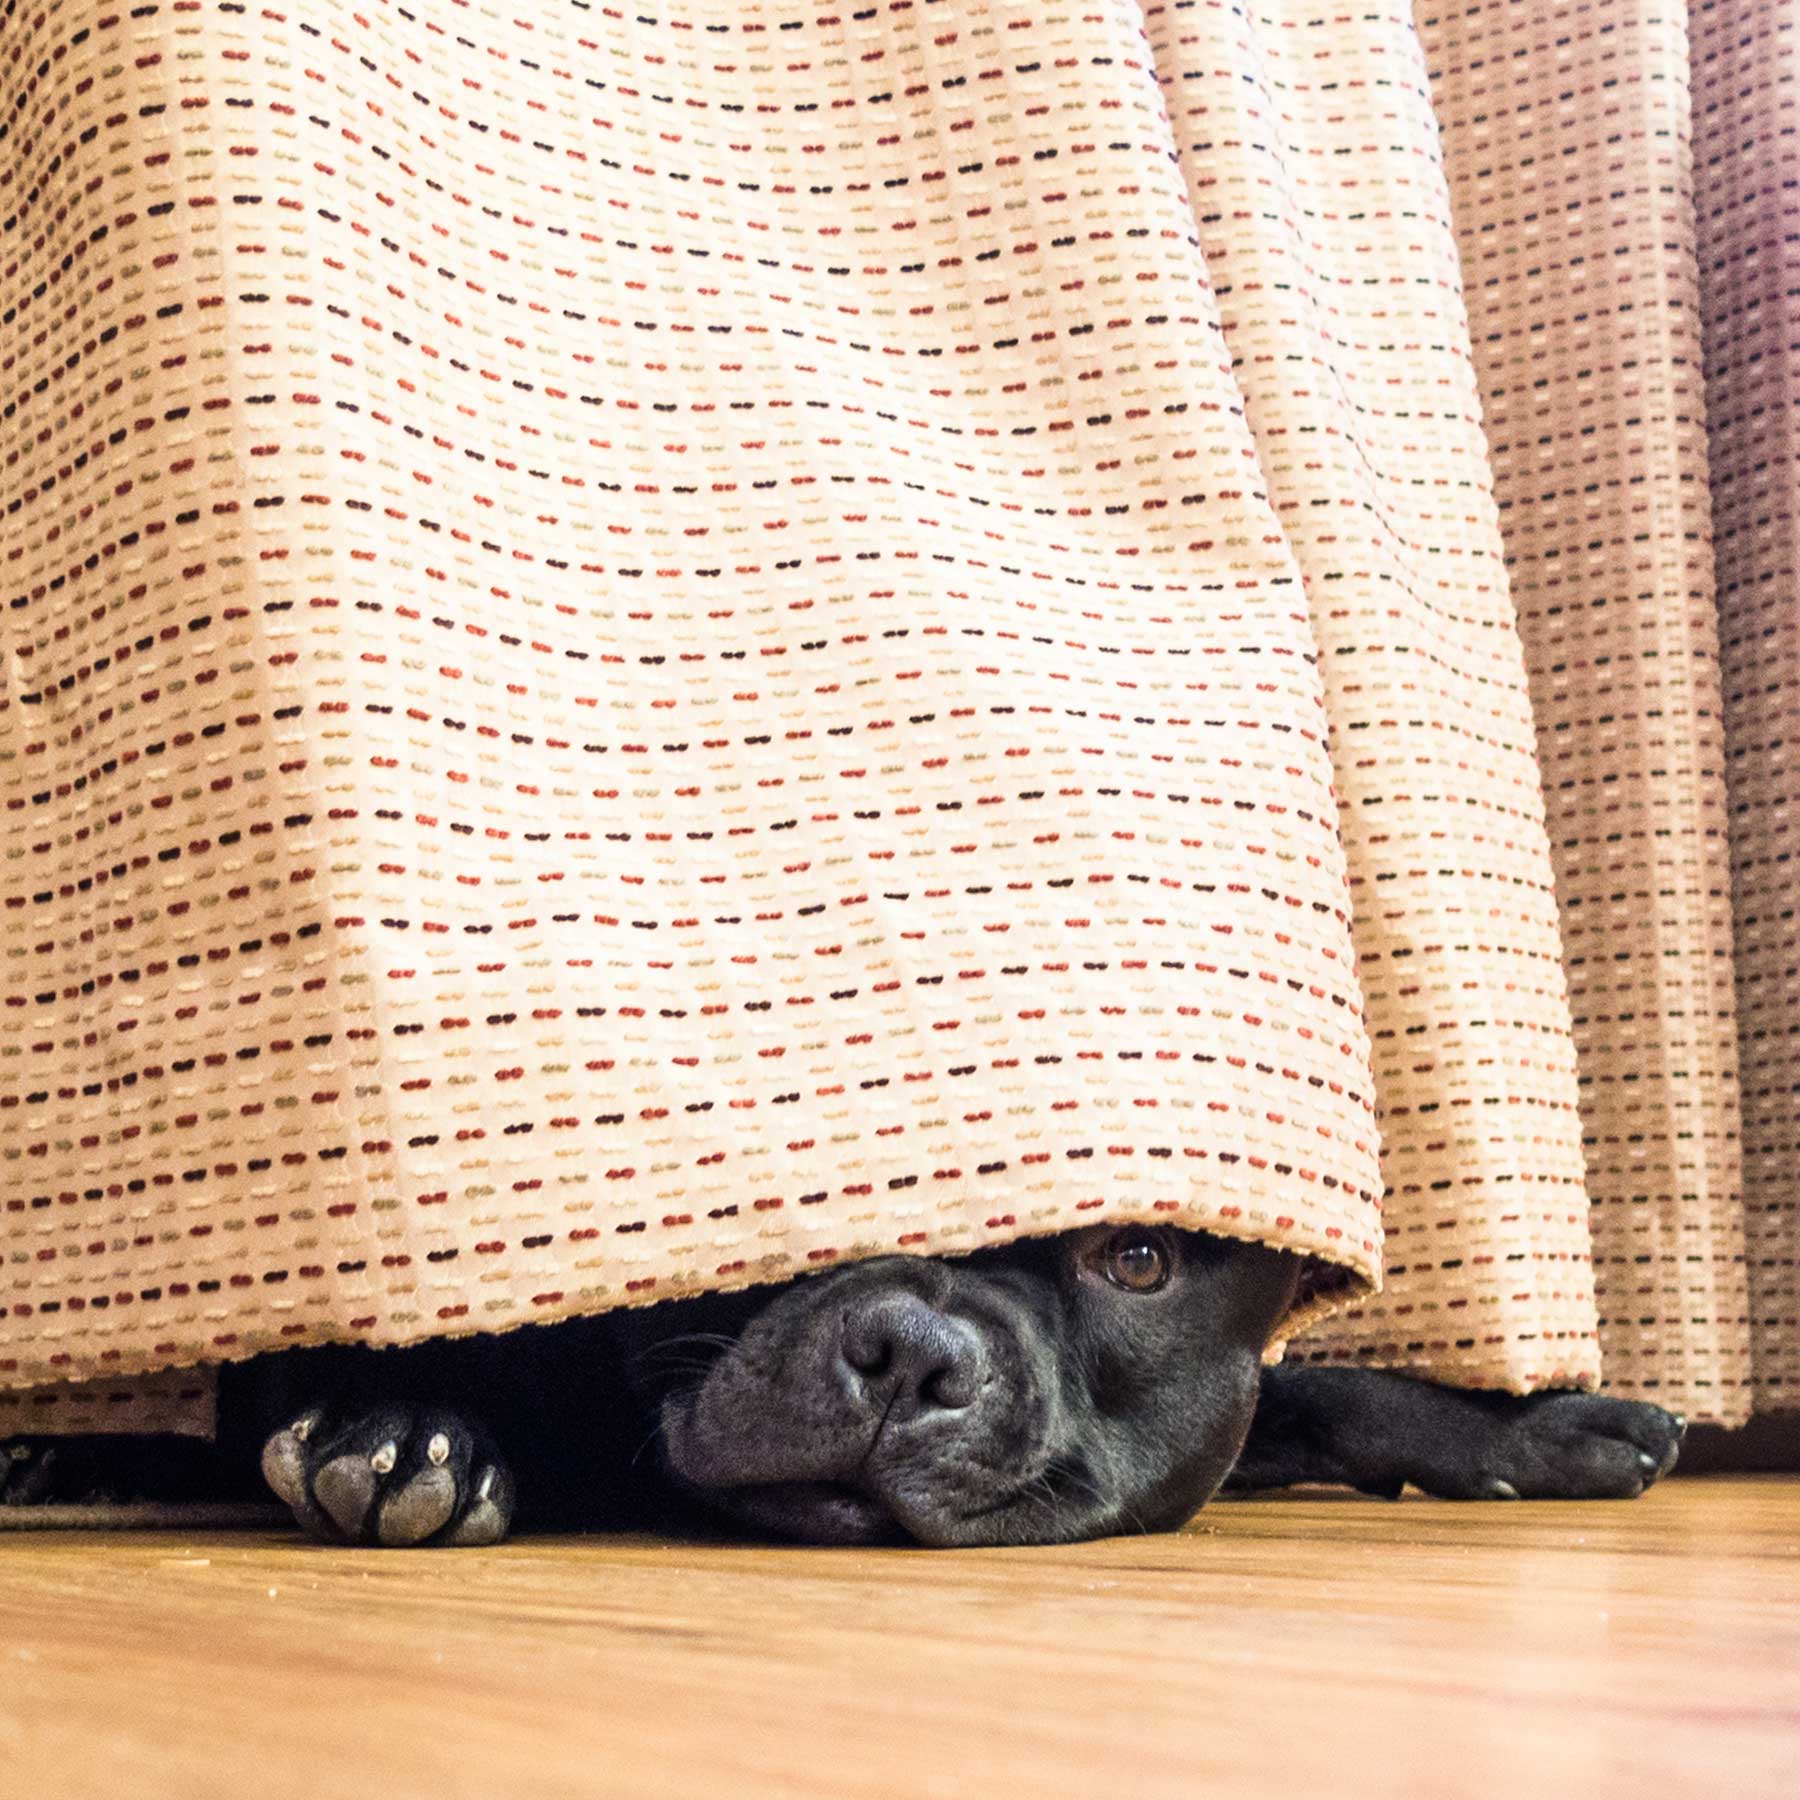 pup peeking out from under a curtain